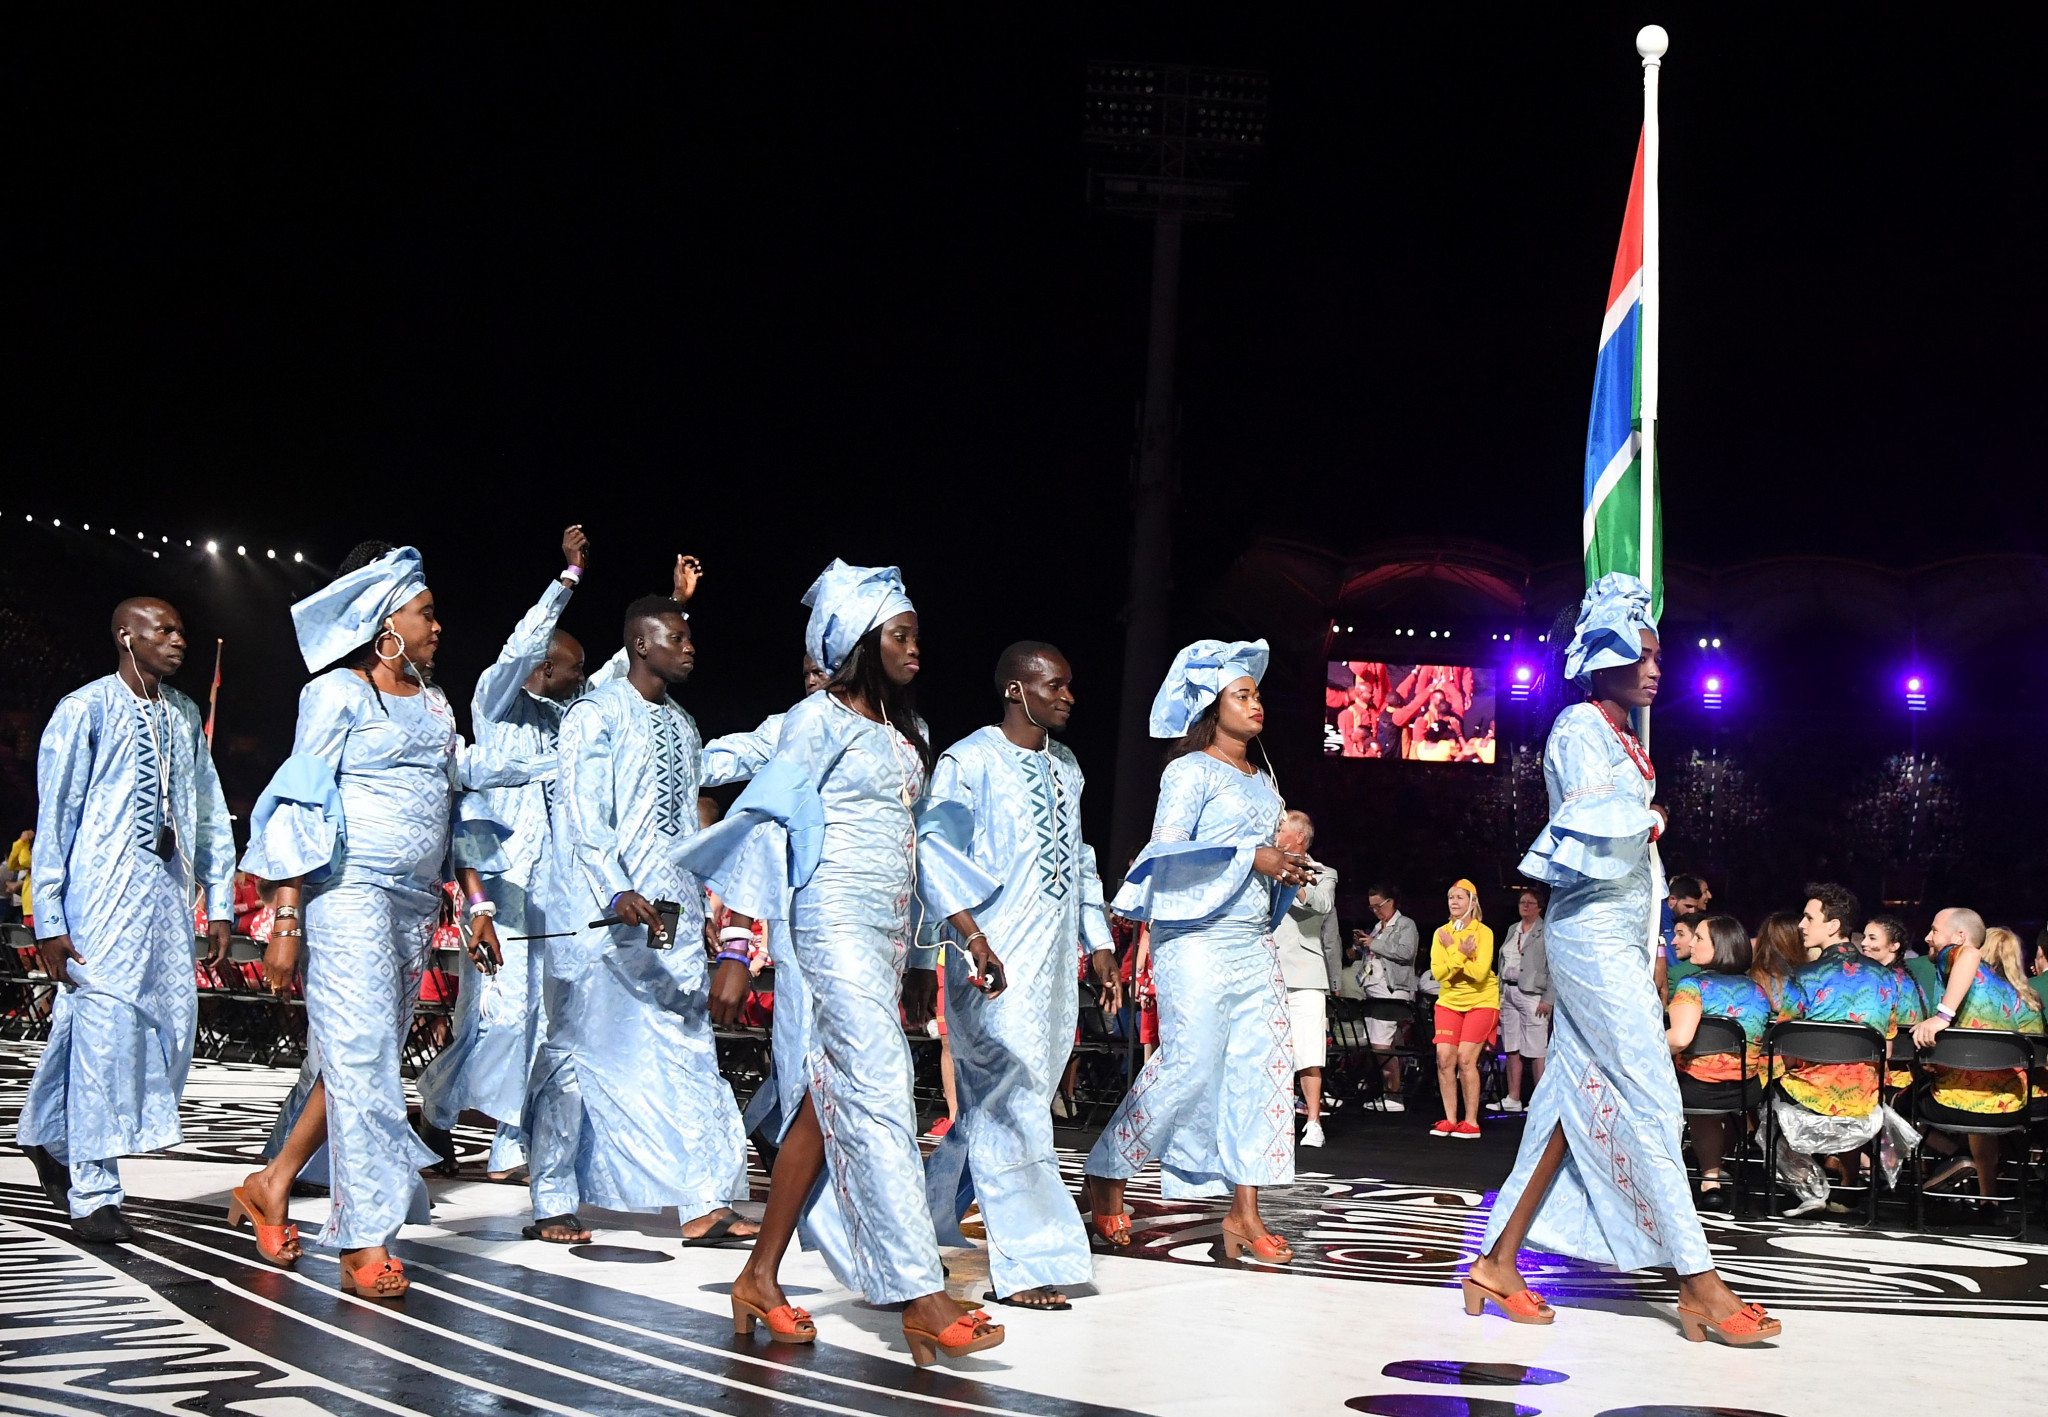 The Gambia returned to the Commonwealth Games at Gold Coast 2018 after missing Glasgow 2014 due to political reasons ©Getty Images